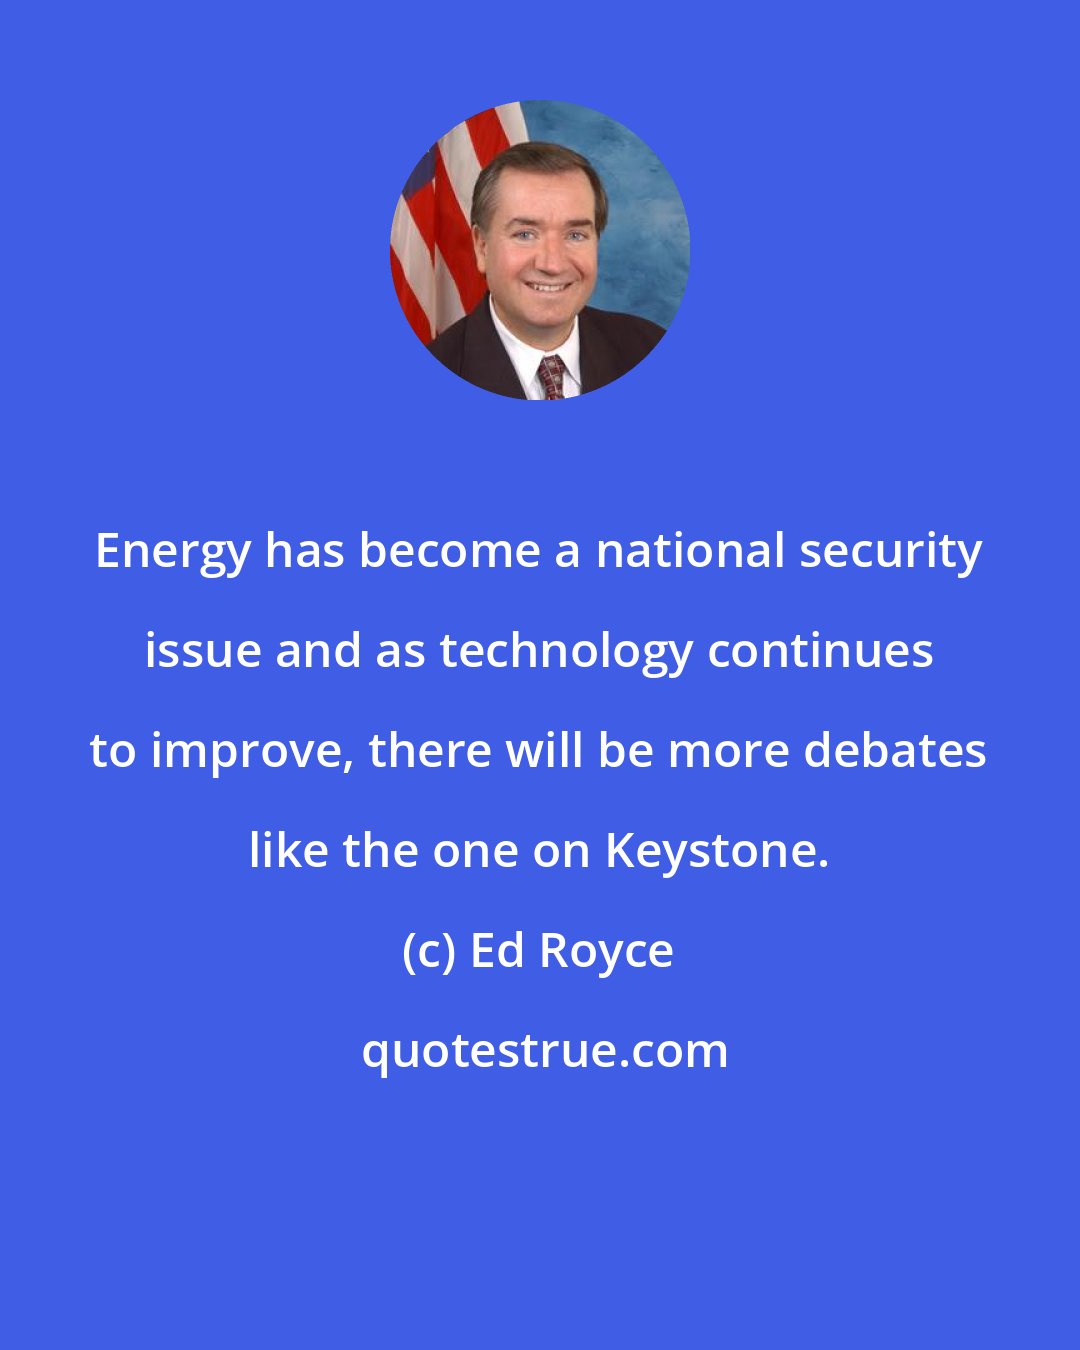 Ed Royce: Energy has become a national security issue and as technology continues to improve, there will be more debates like the one on Keystone.